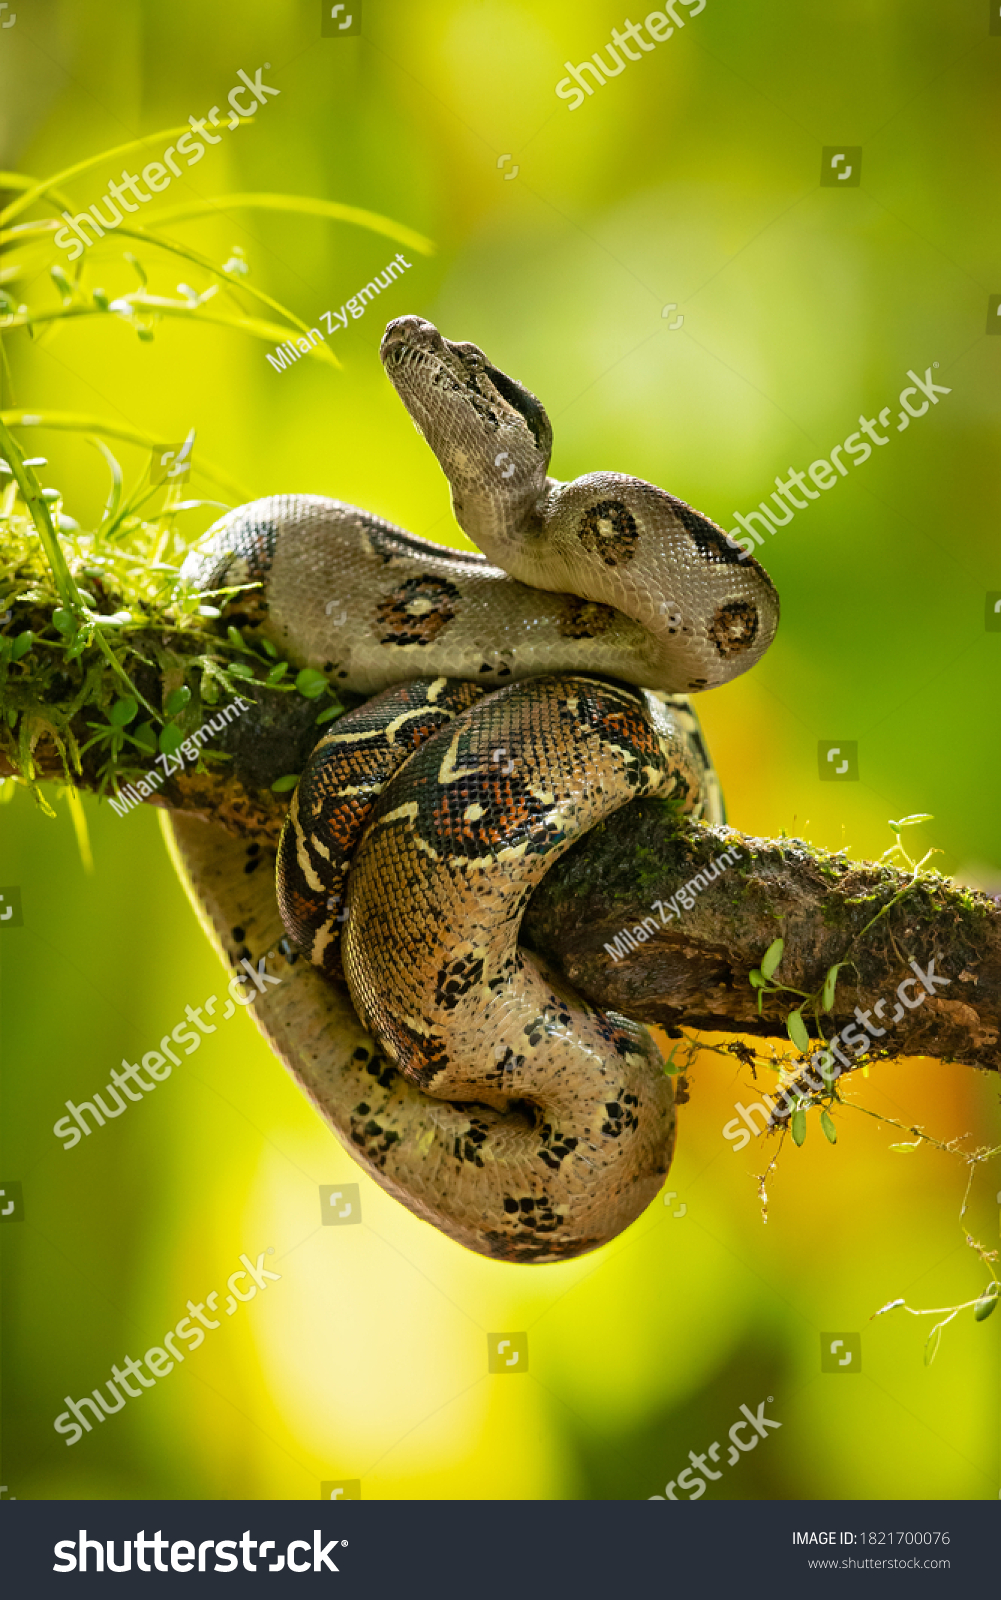 The boa constrictor (Boa constrictor), also called the red-tailed boa or the common boa, is a species of large, non-venomous, heavy-bodied snake that is frequently kept and bred in captivity #1821700076